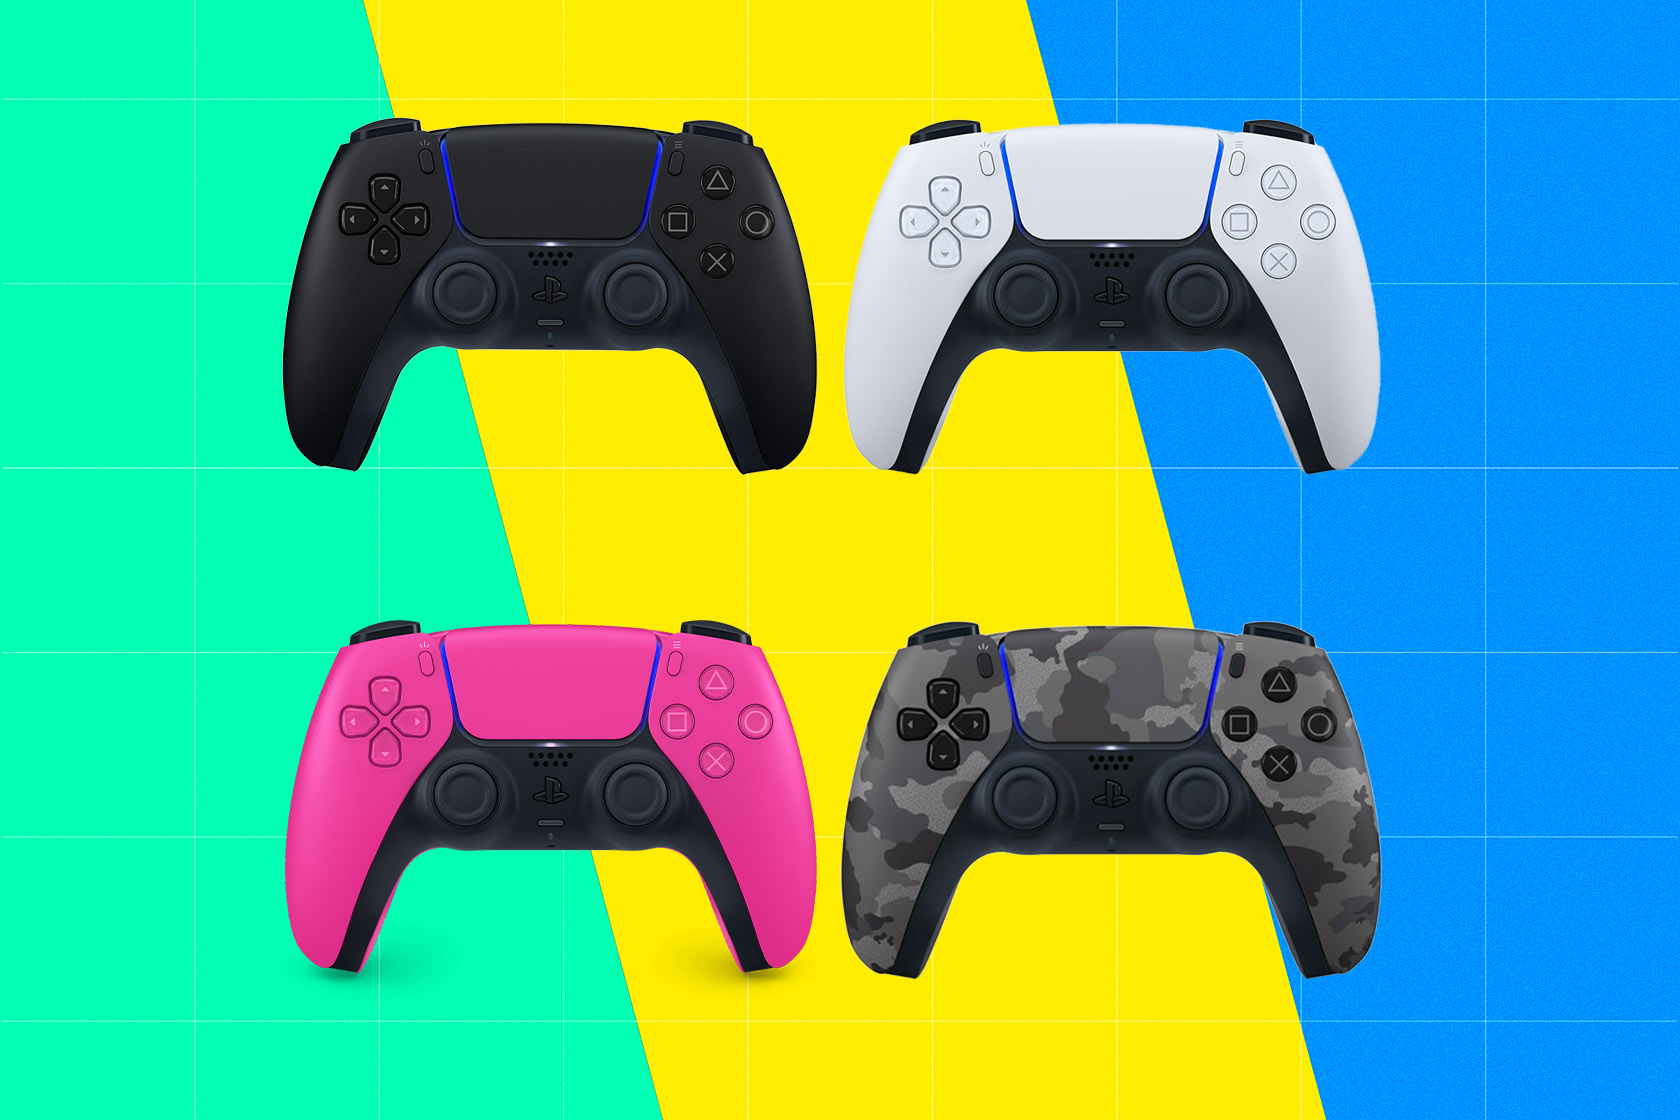 Walmart has PS5 Playstation 5 controllers for $69